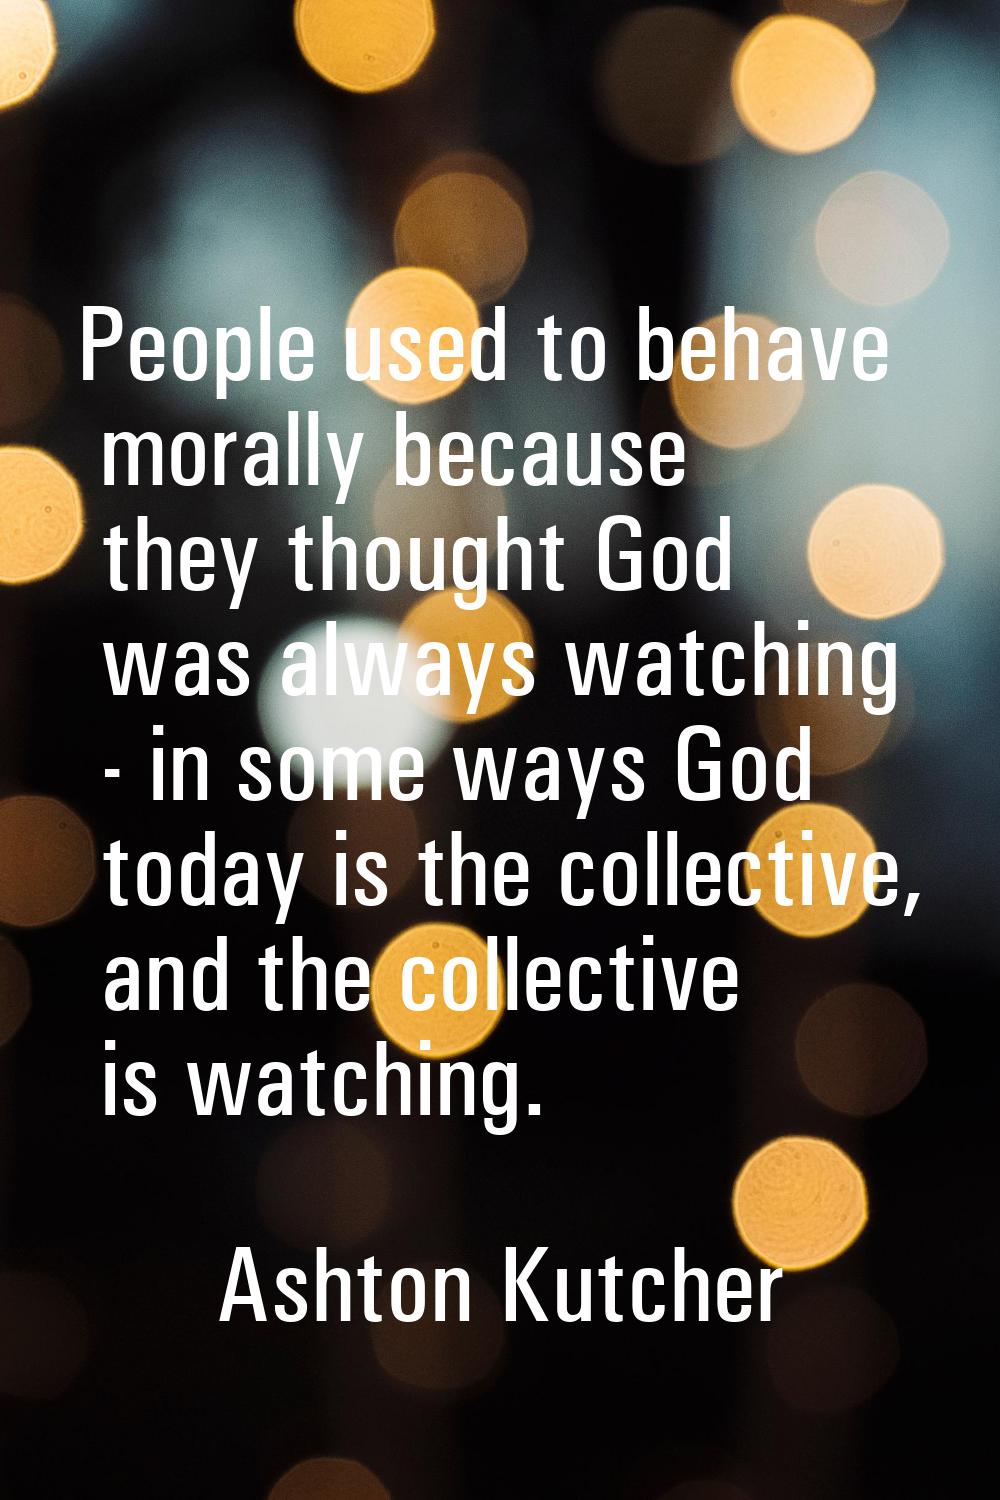 People used to behave morally because they thought God was always watching - in some ways God today